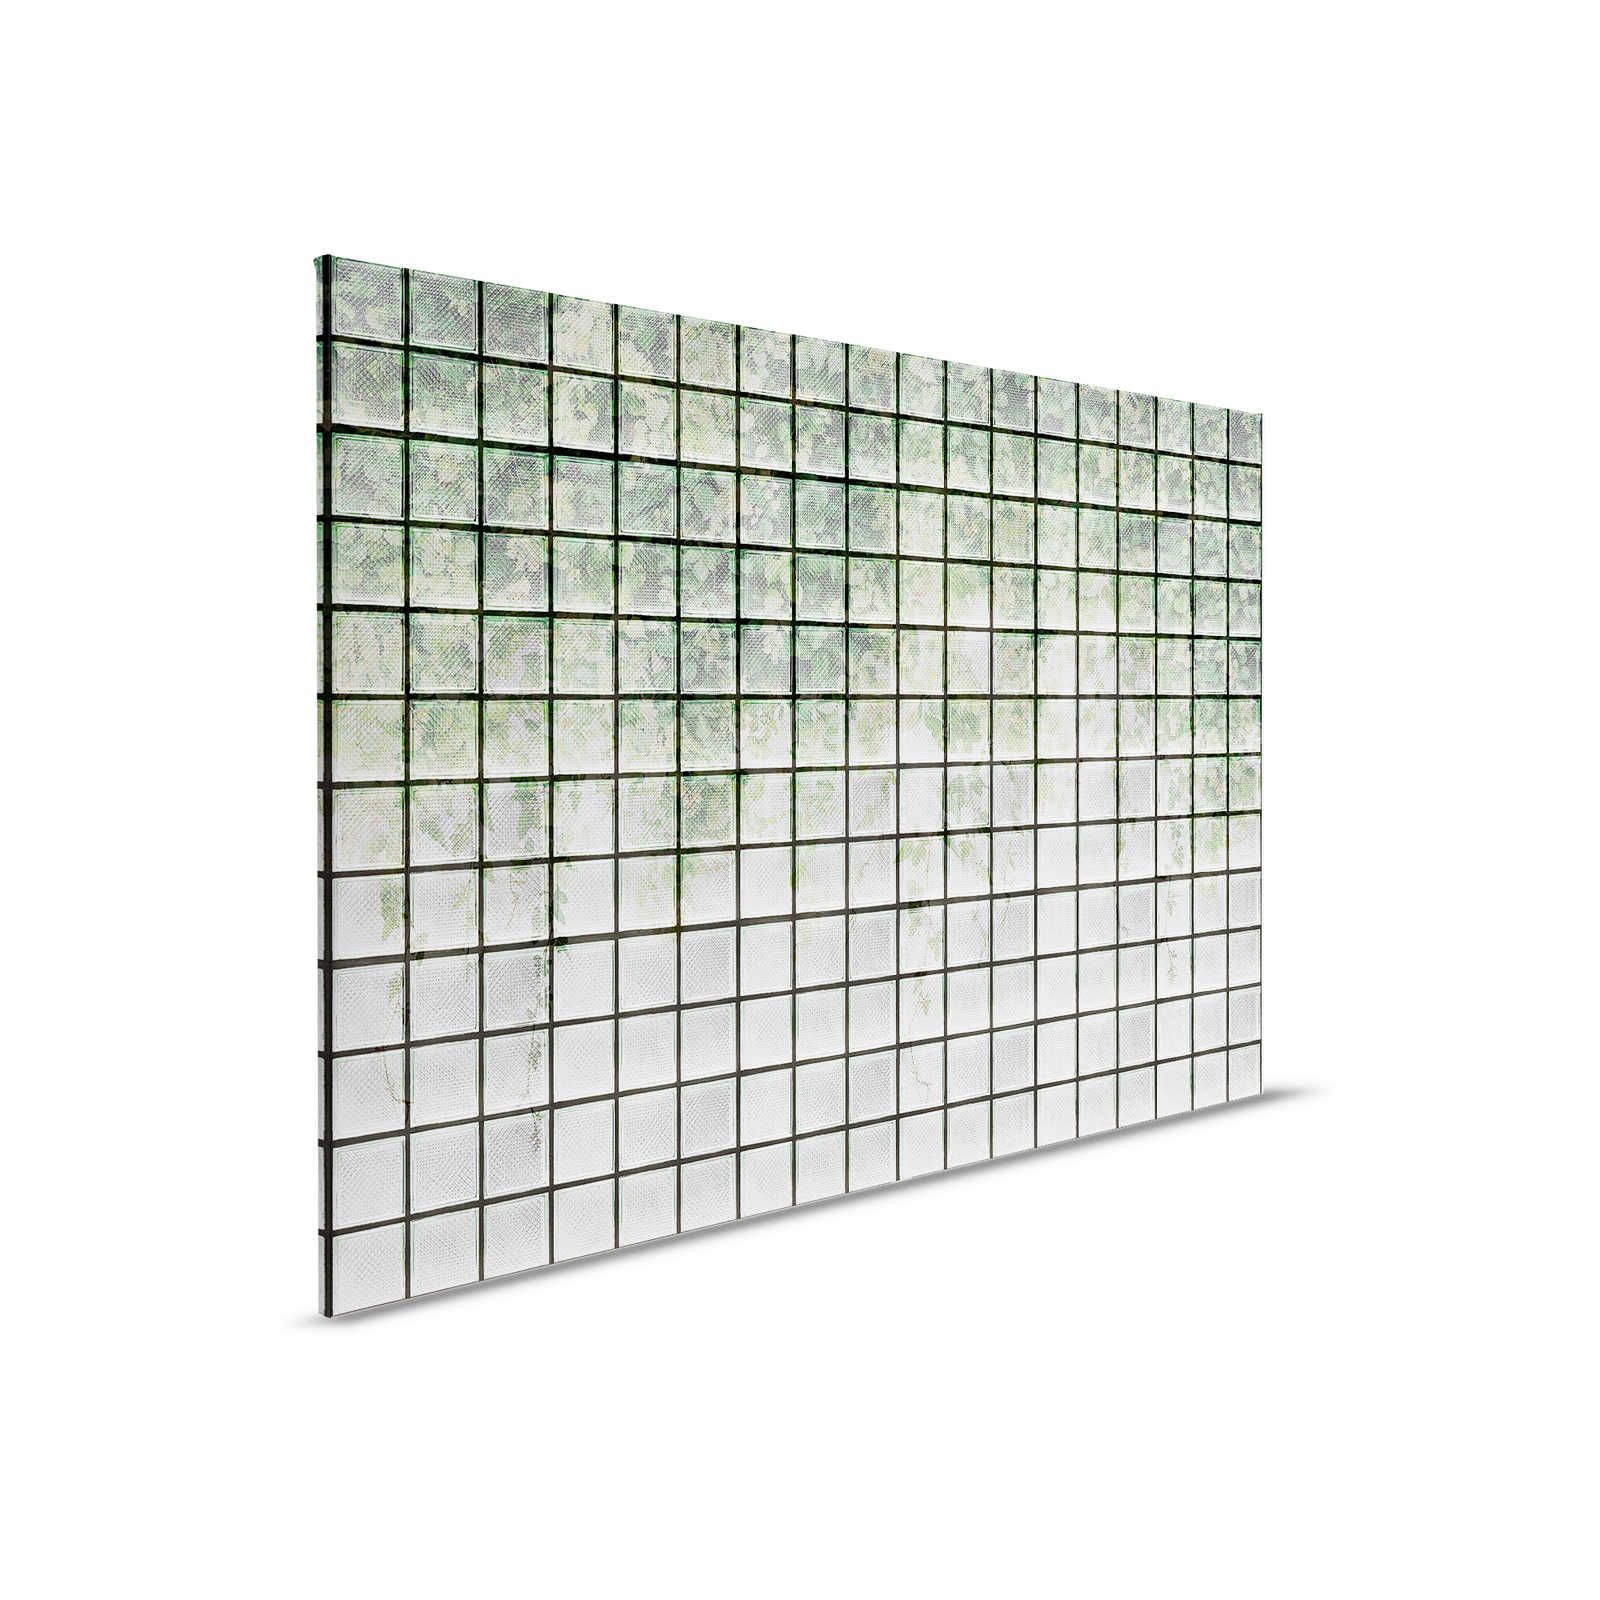         Green House 2 - Greenhouse Canvas painting Leaves & Glass bricks - 0.90 m x 0.60 m
    